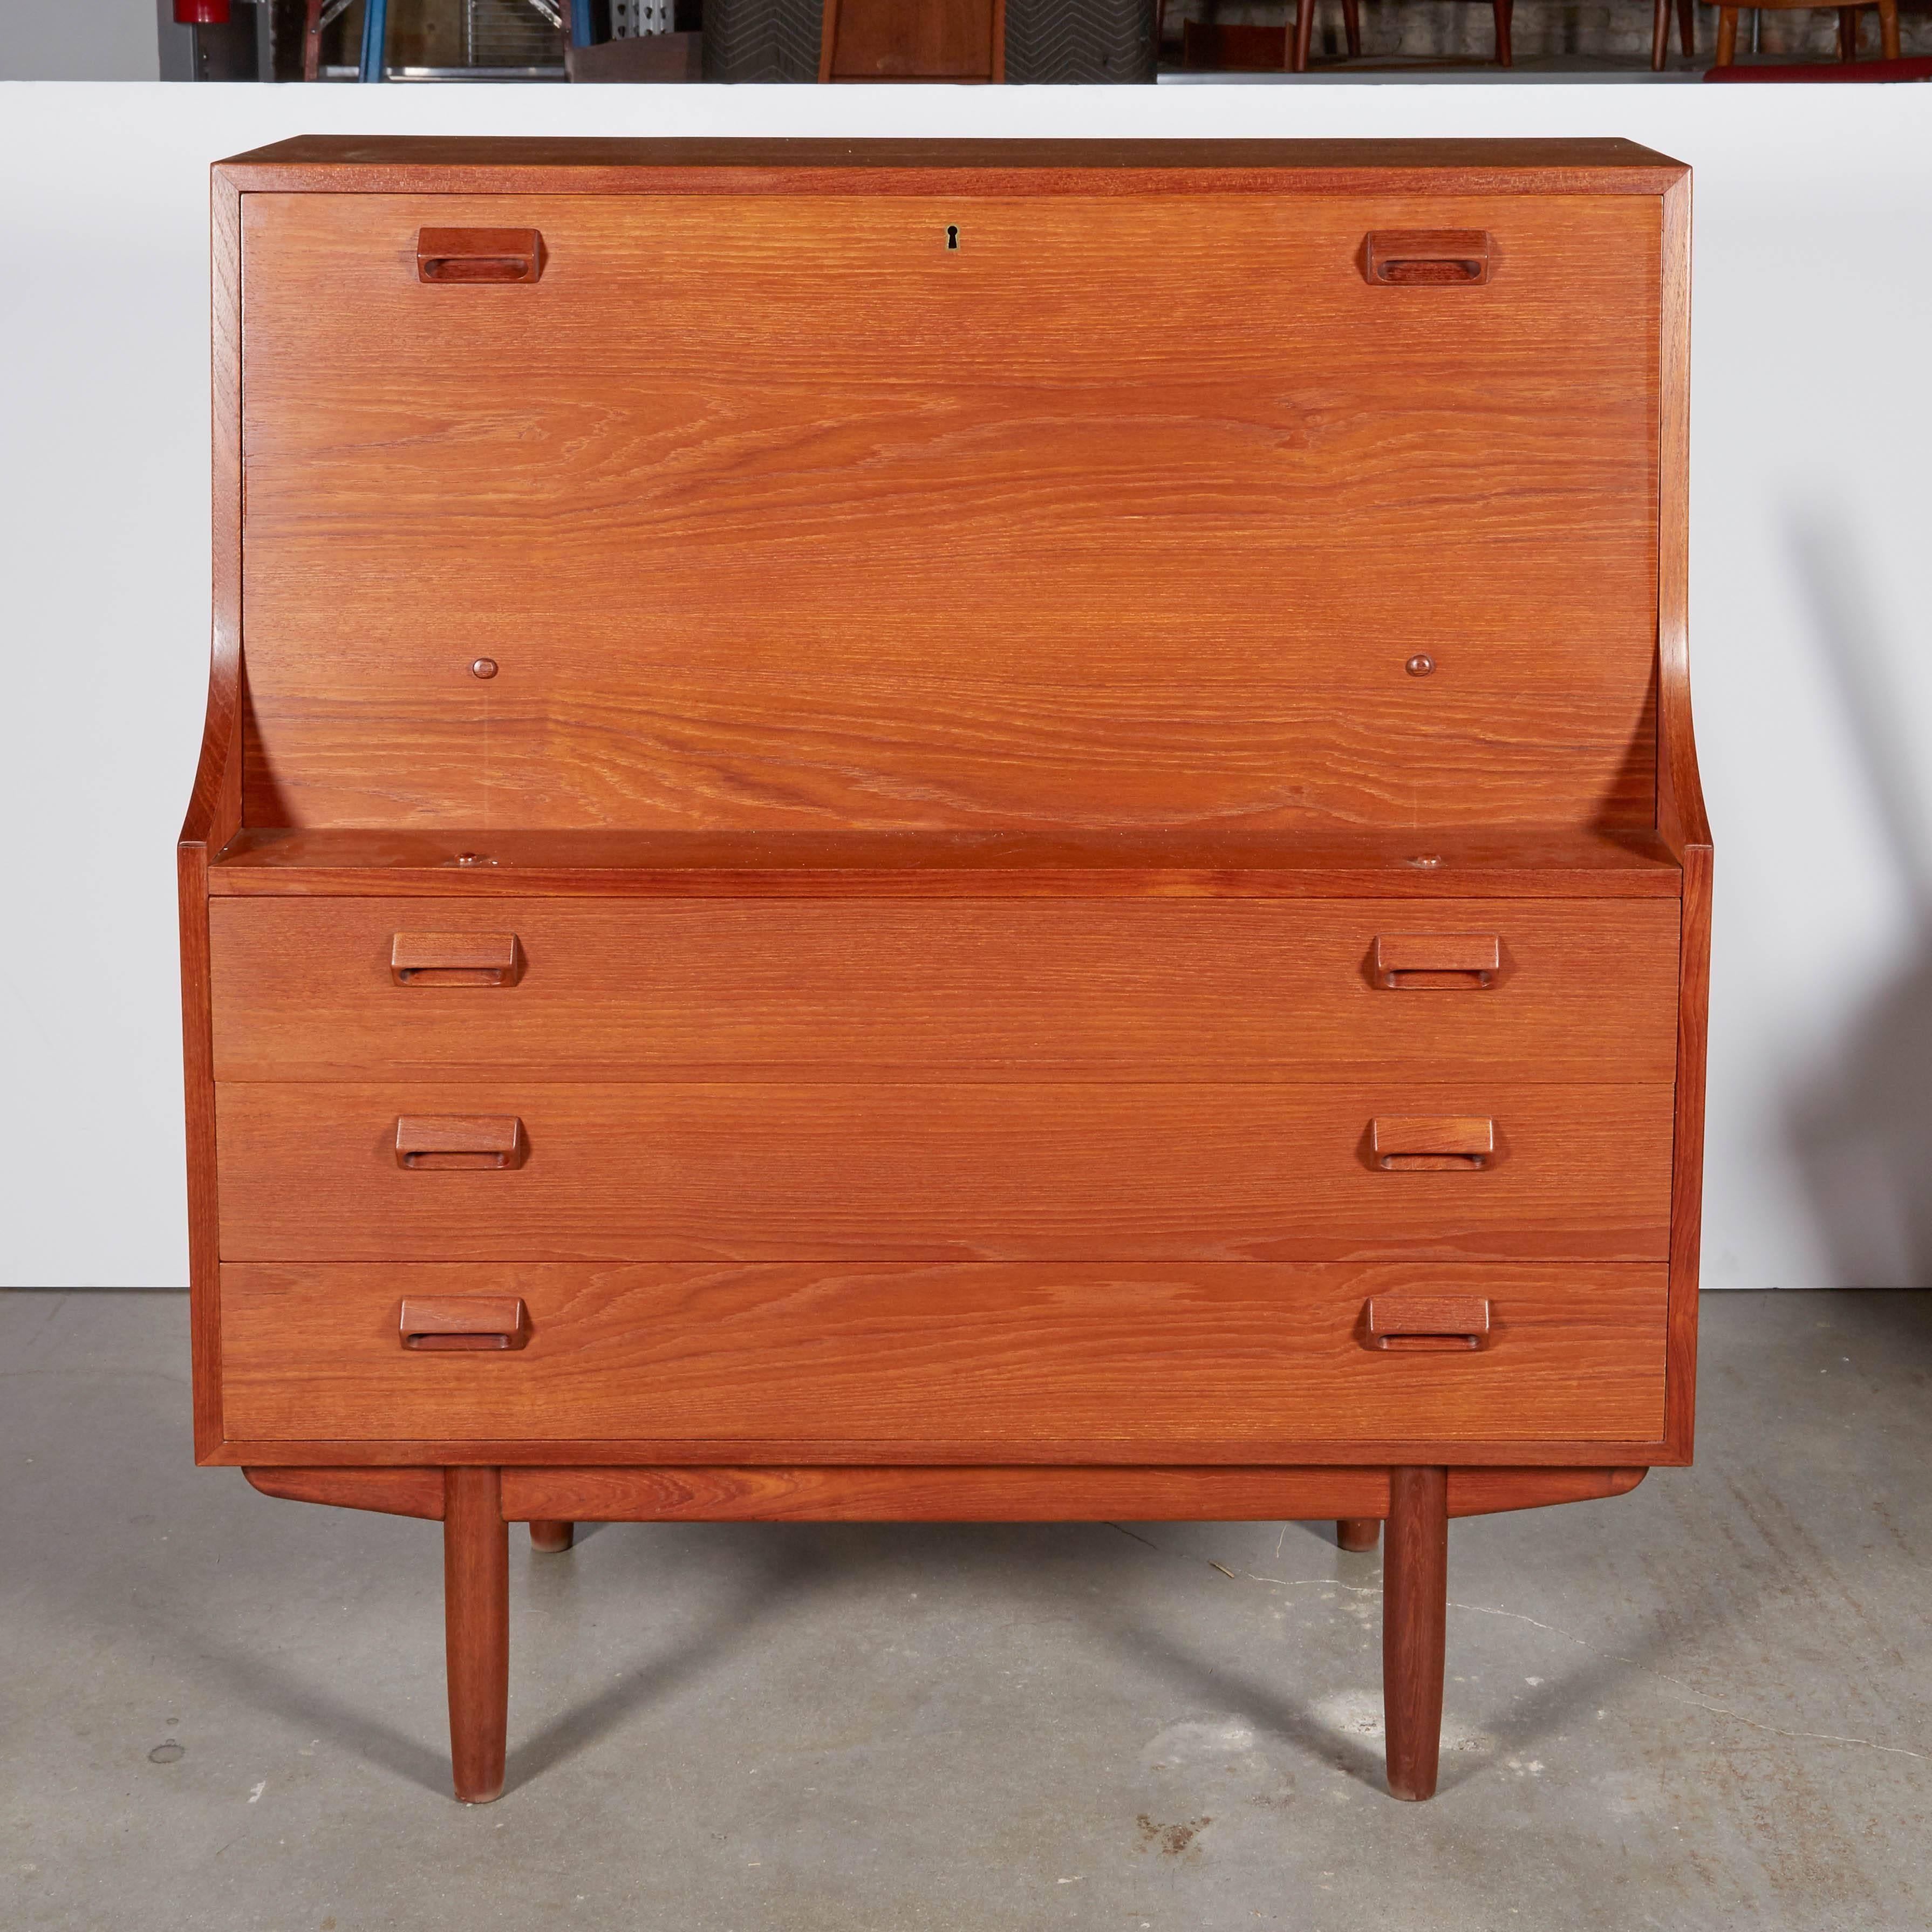 Vintage 1950s Secretary Desk by Børge Mogensen

This mid century secretary is in excellent condition, and is one of the designers' Classic designs. The desk goes in any part of the house but is very good in a kids room or guest room. You have